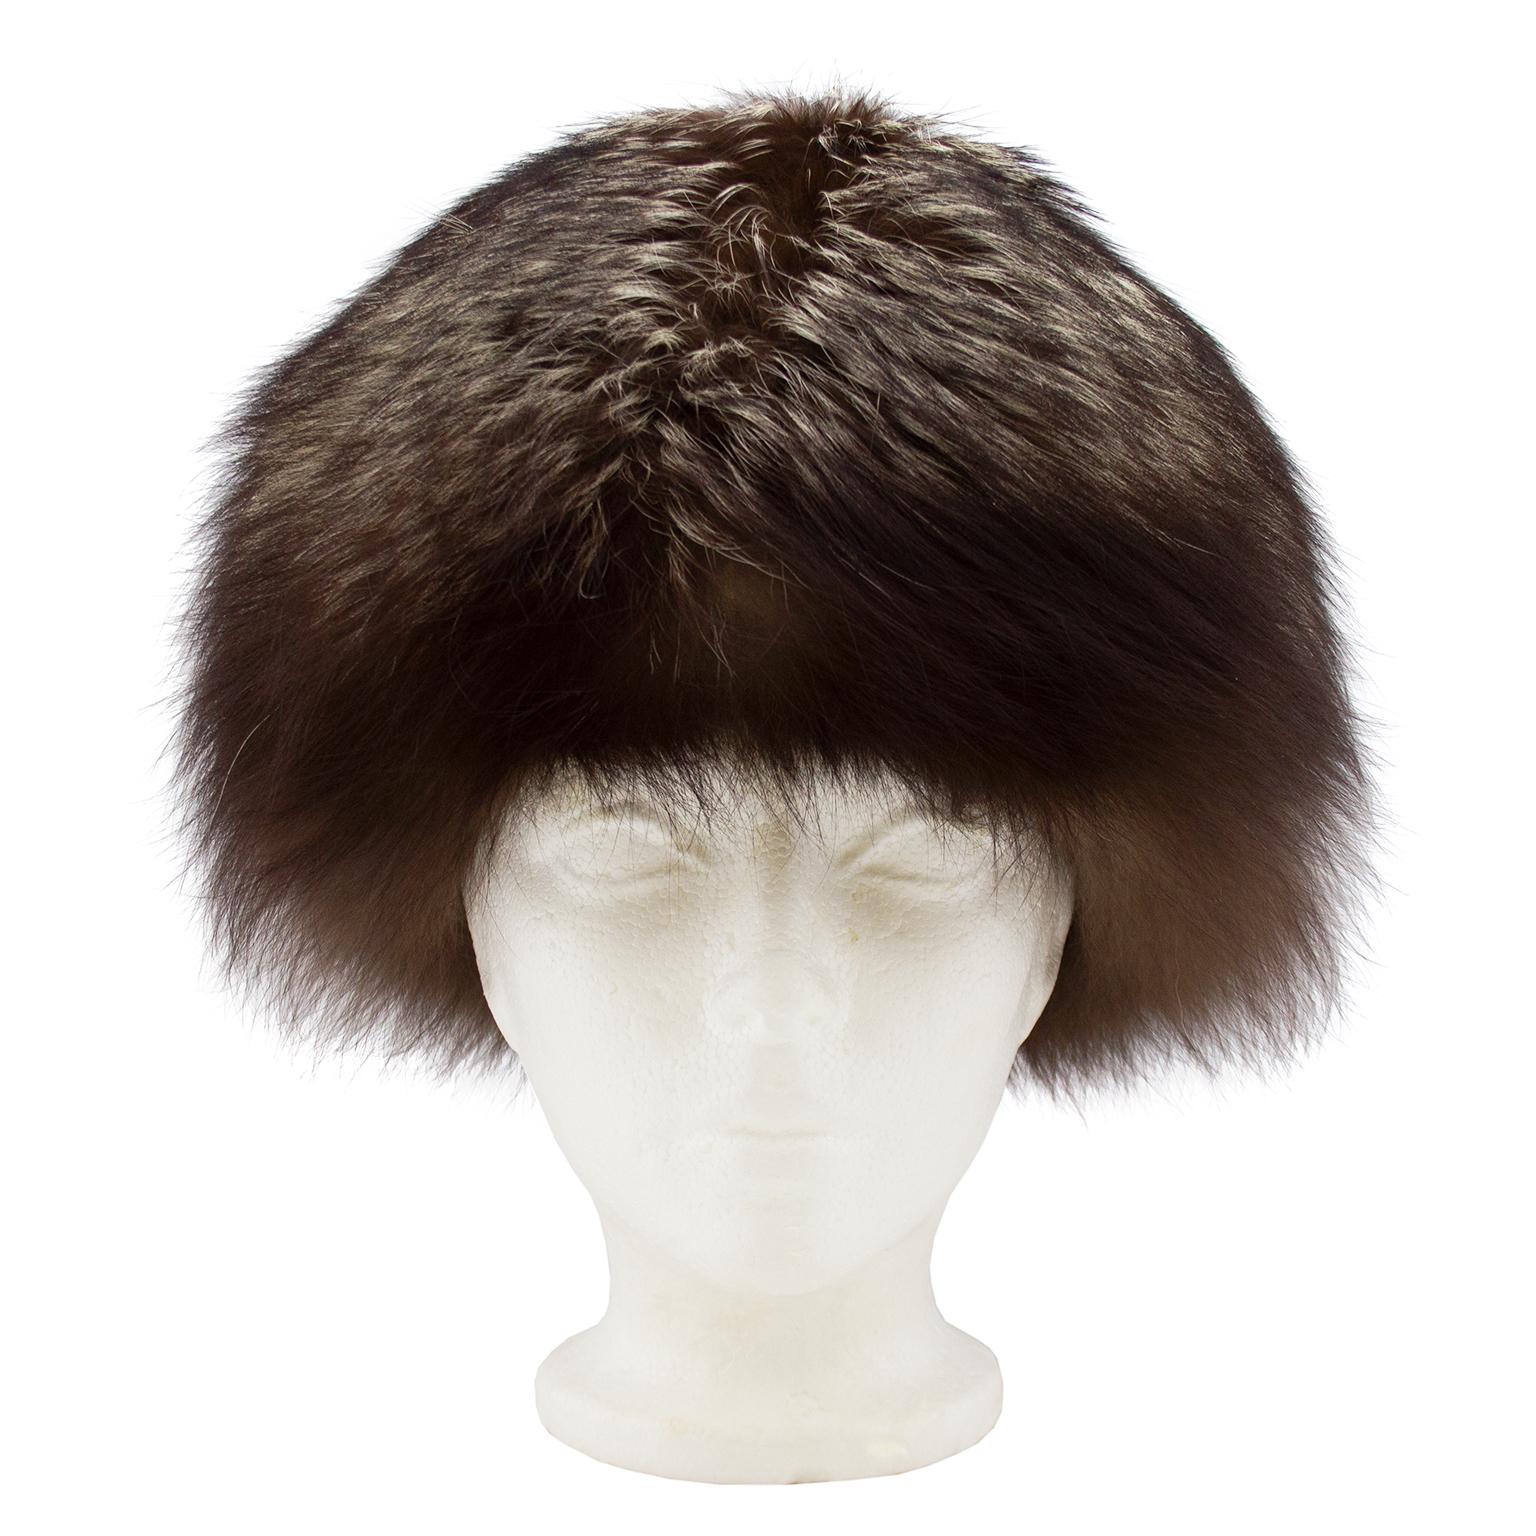 Classic brown ad grey raccoon fur hat from the 1960s. Made by Canadian department store and furrier Holt Renfrew. Excellent vintage condition. Average size fit. 